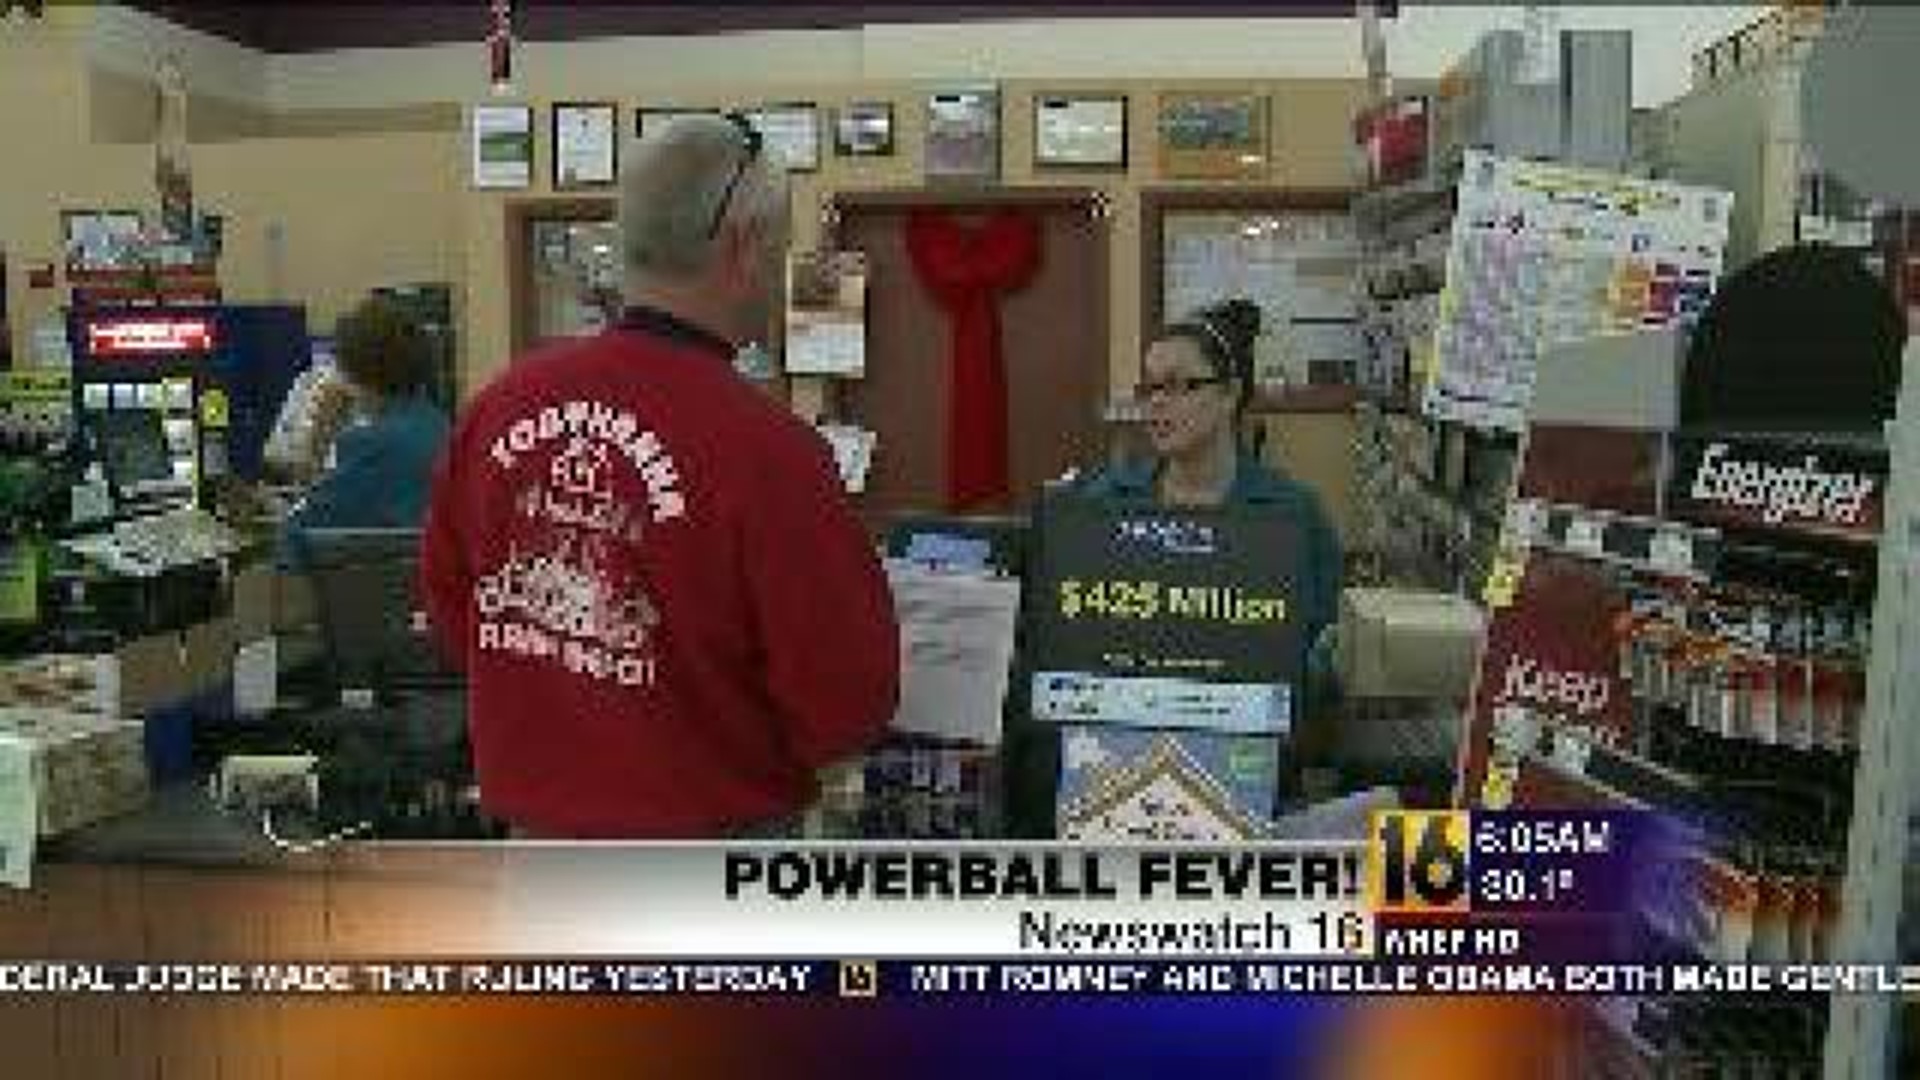 Powerball Fever: What Are The Odds?